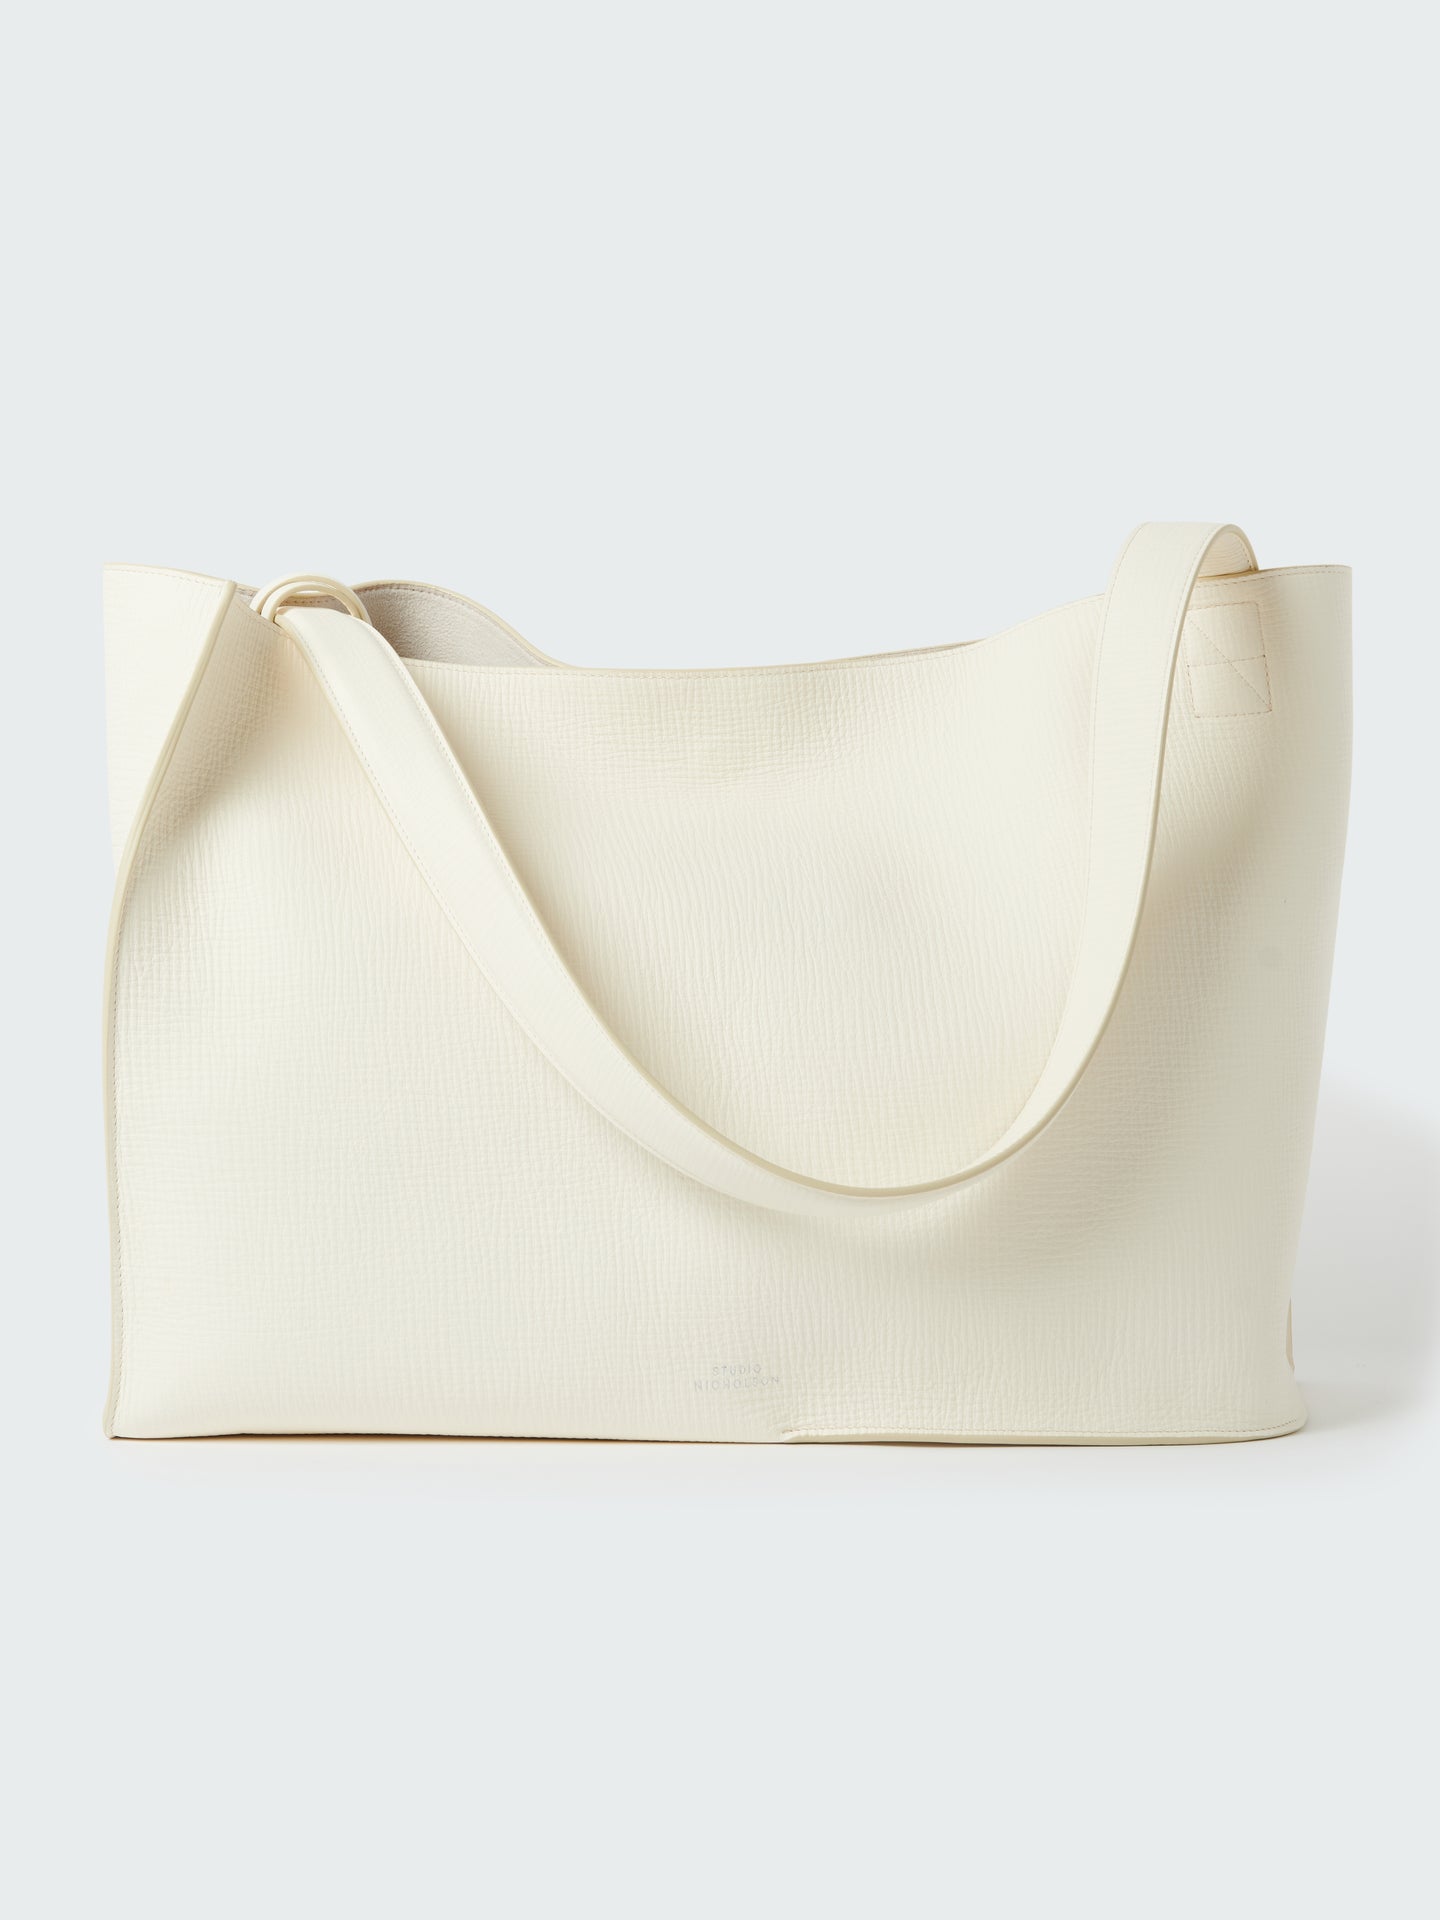 Doublet Leather Bag in Parchment